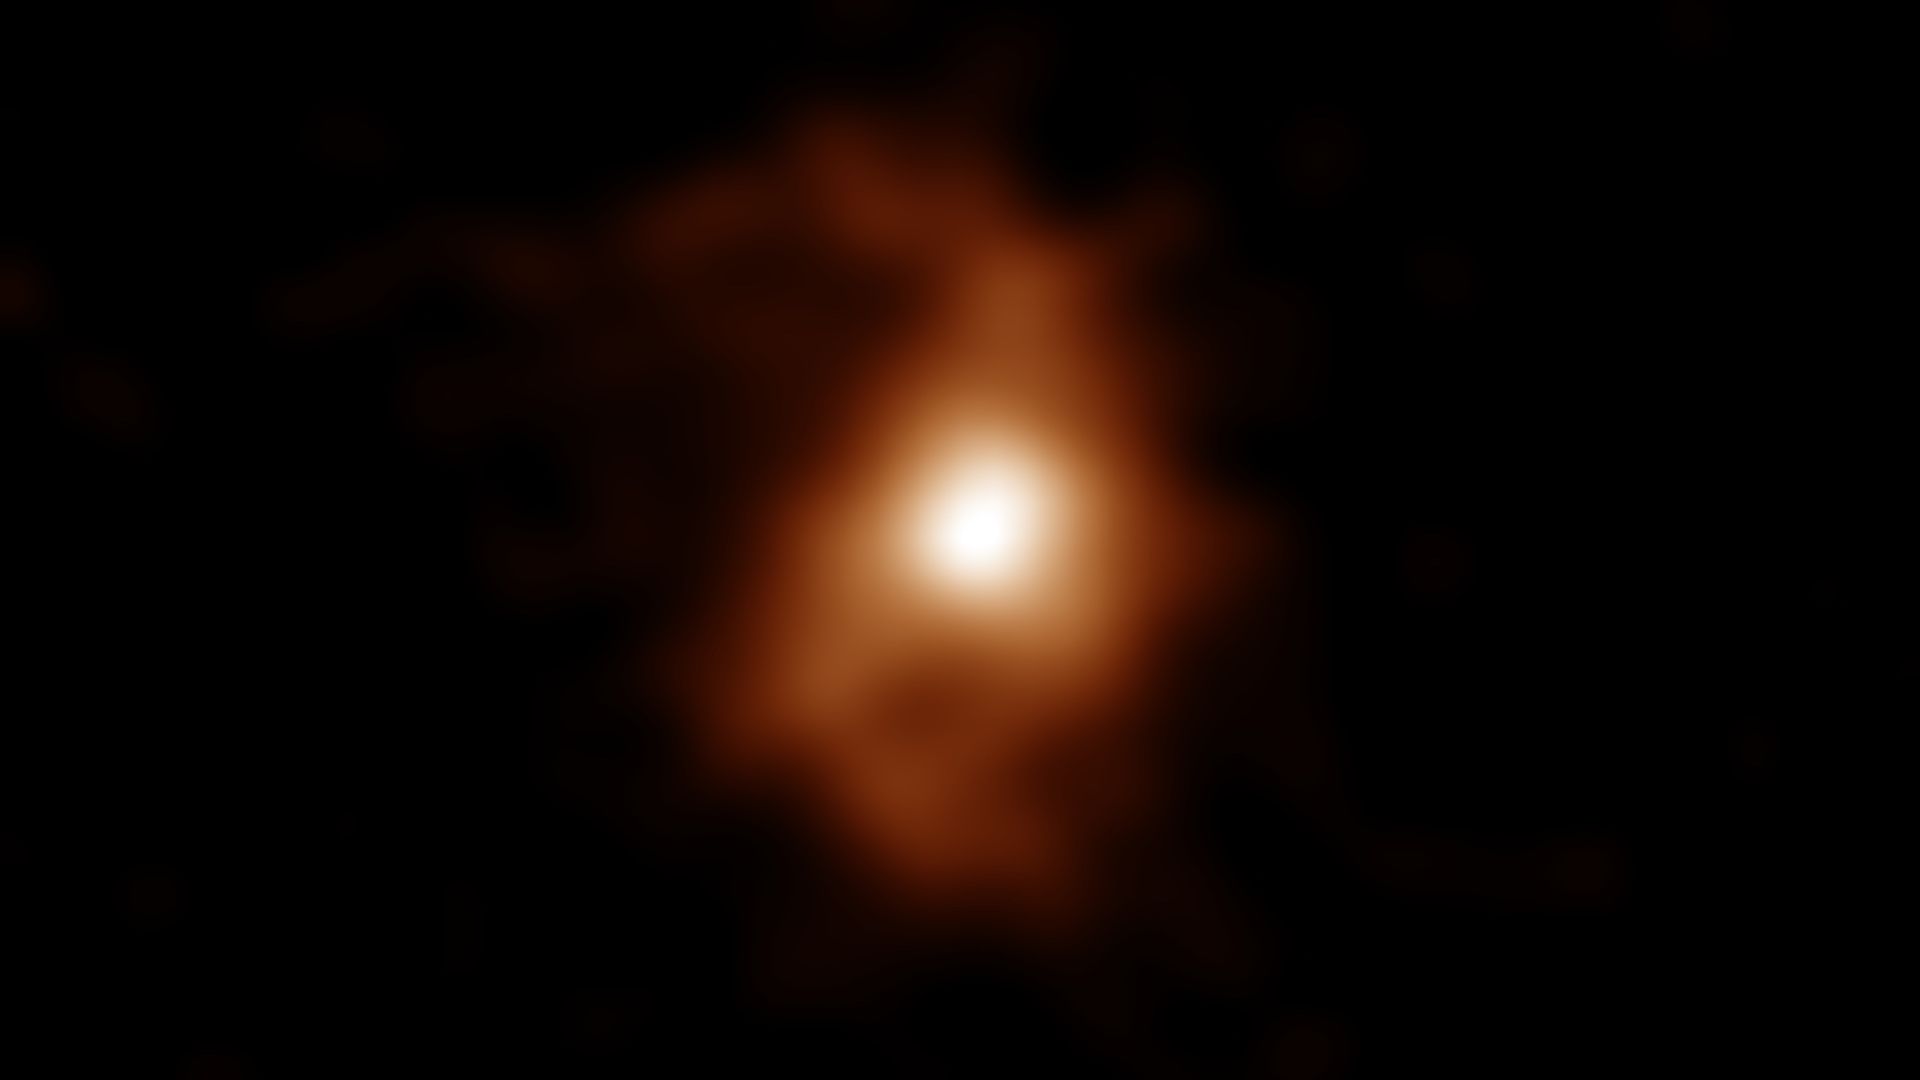 An orange and yellow image of a galaxy in the early universe